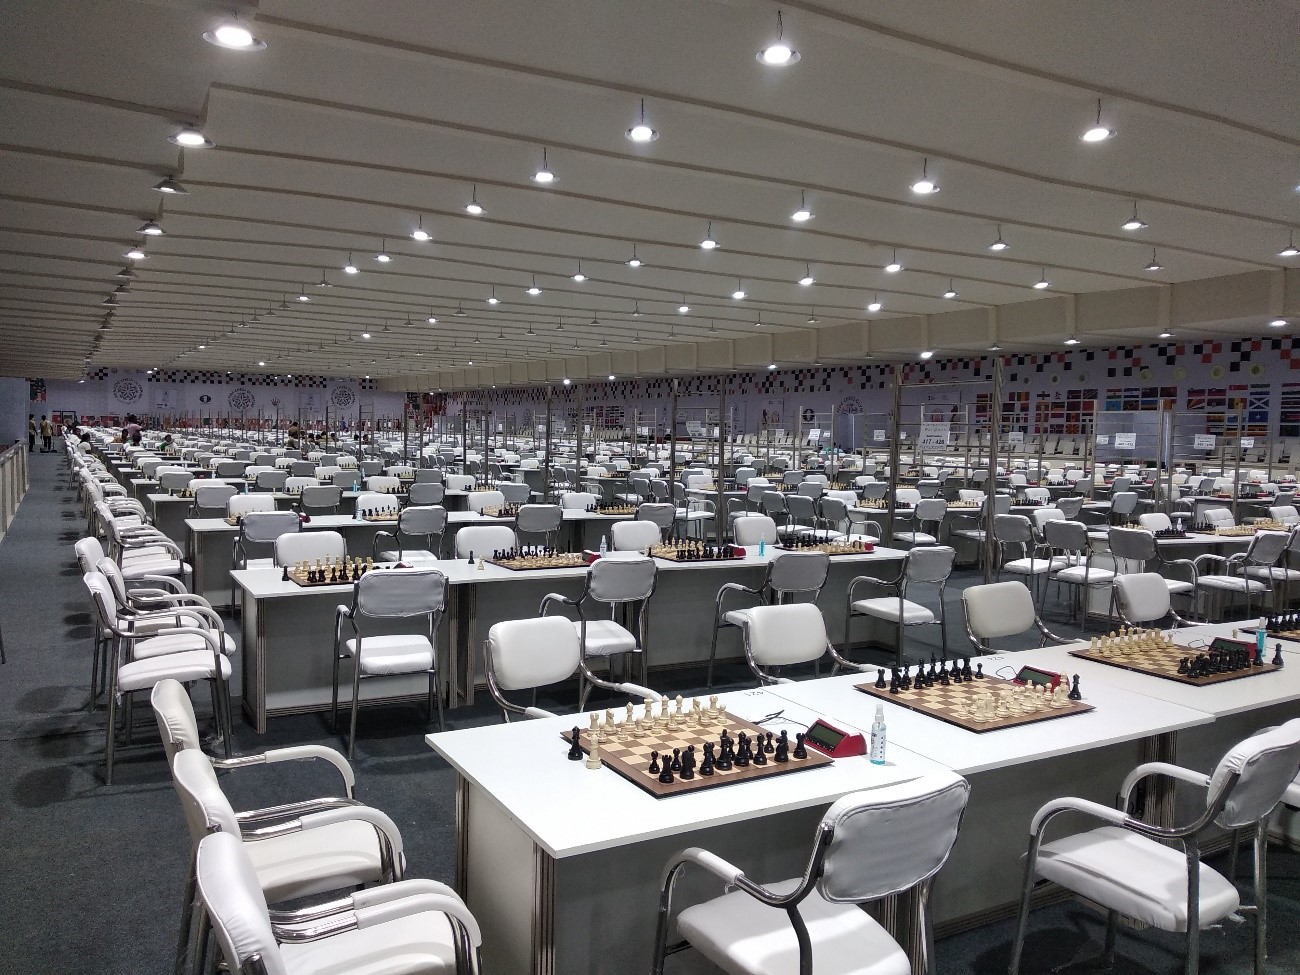 Play at the 44th Chess Olympiad venue in Curtain Raiser Rapid